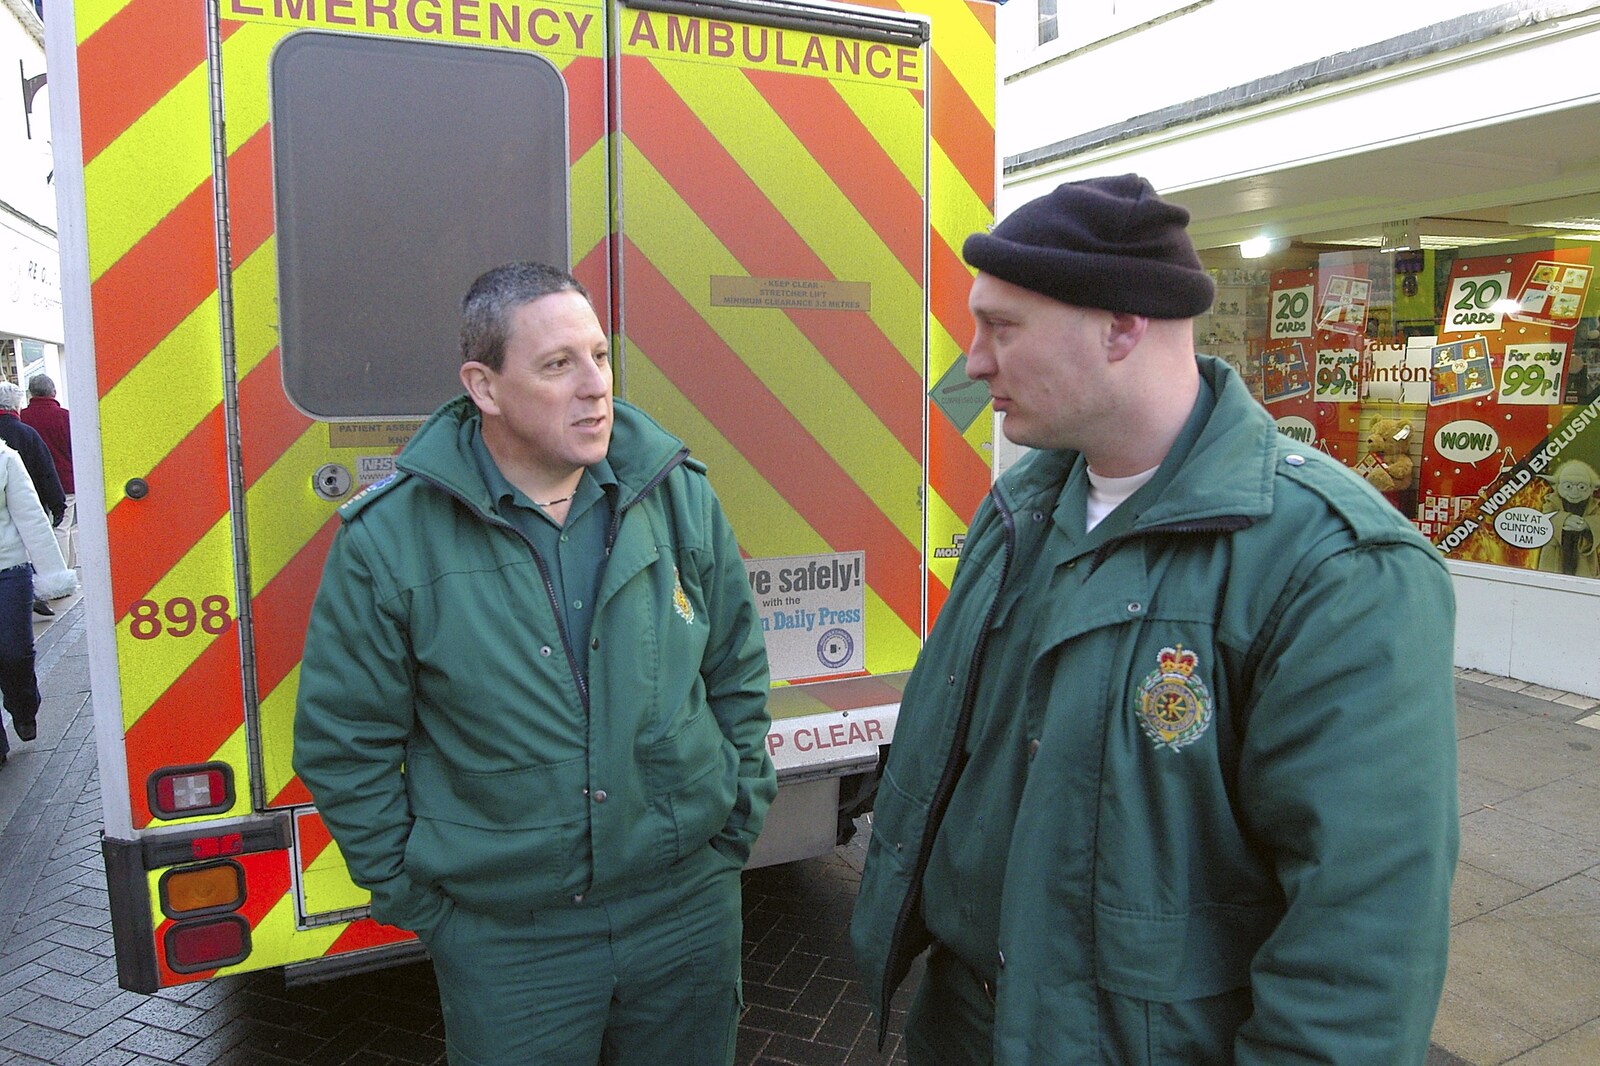 Gov and his colleague chat in Mere Street from USA Chicken Catches Fire: Gov and the Ambulance, Diss, Norfolk - 19th November 2005